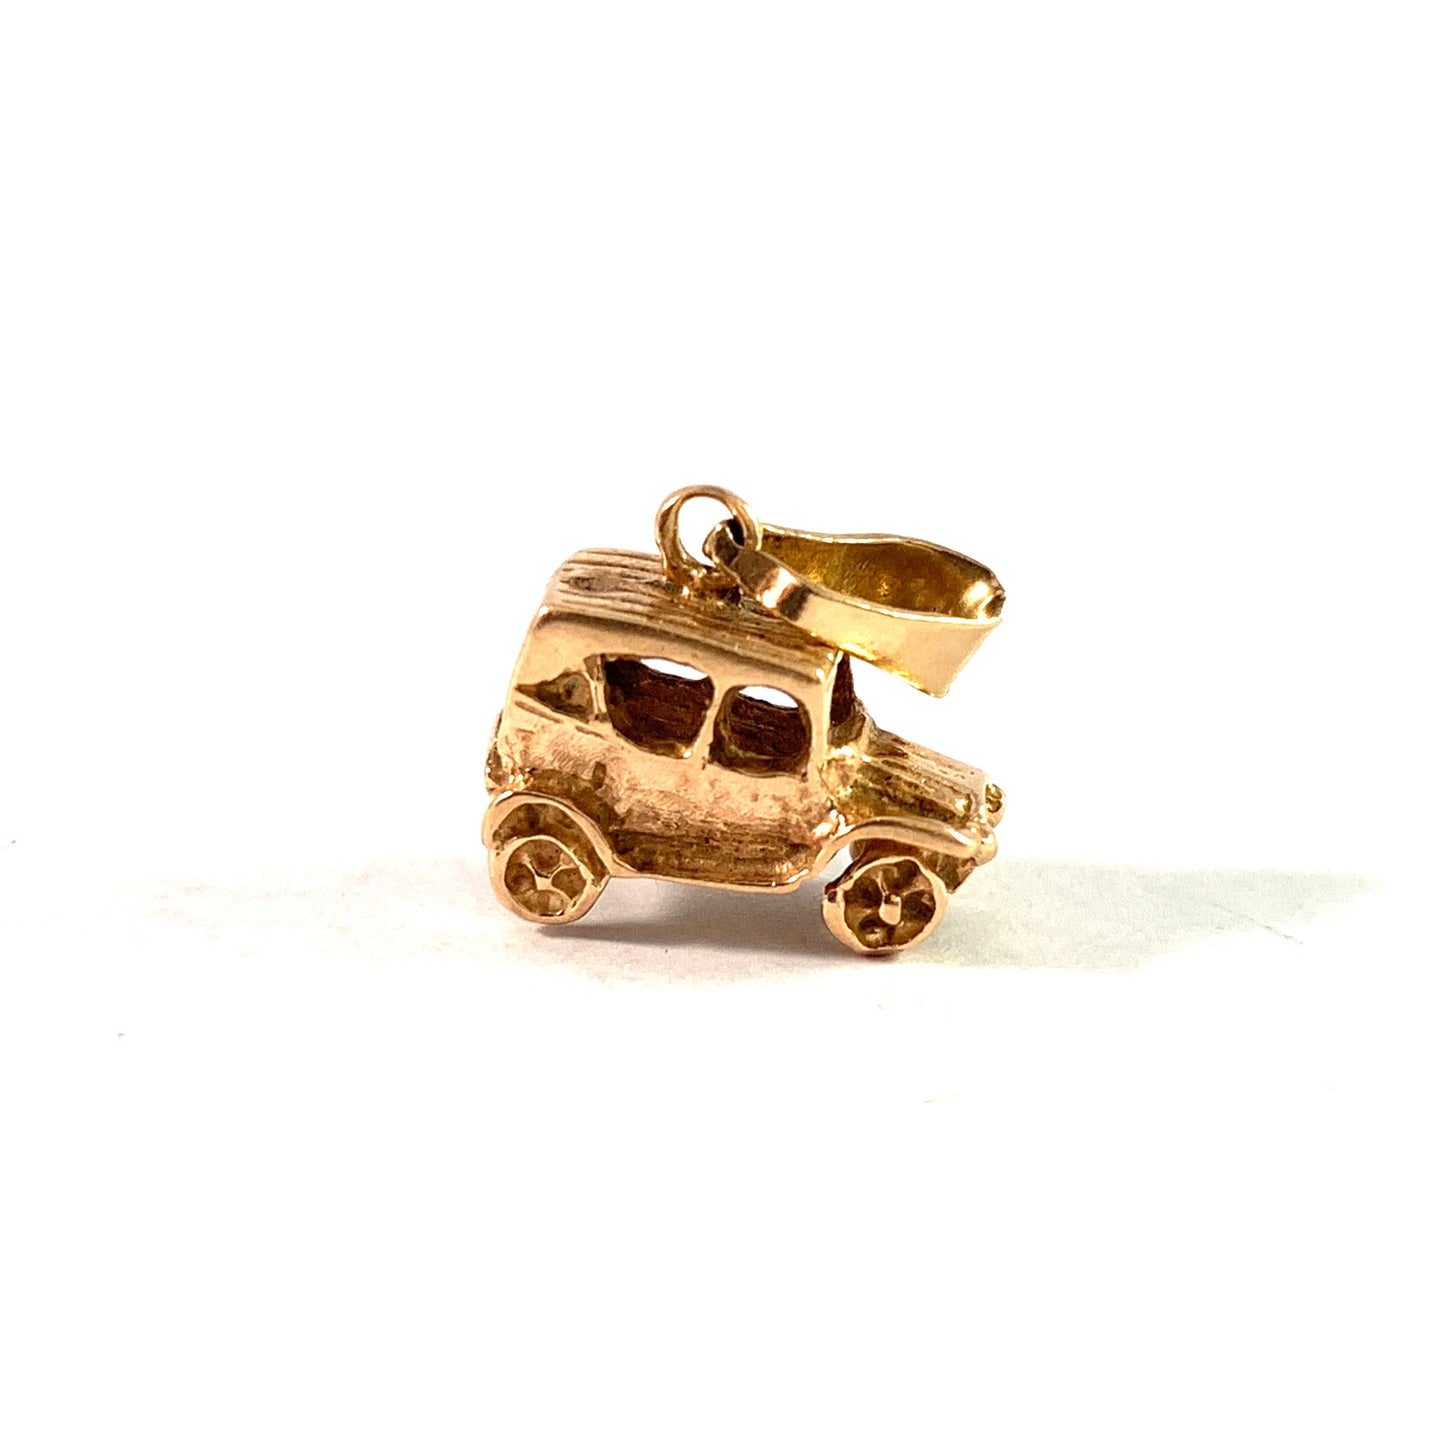 Vintage Mid Century 18k Gold Car T-Ford? Charm.